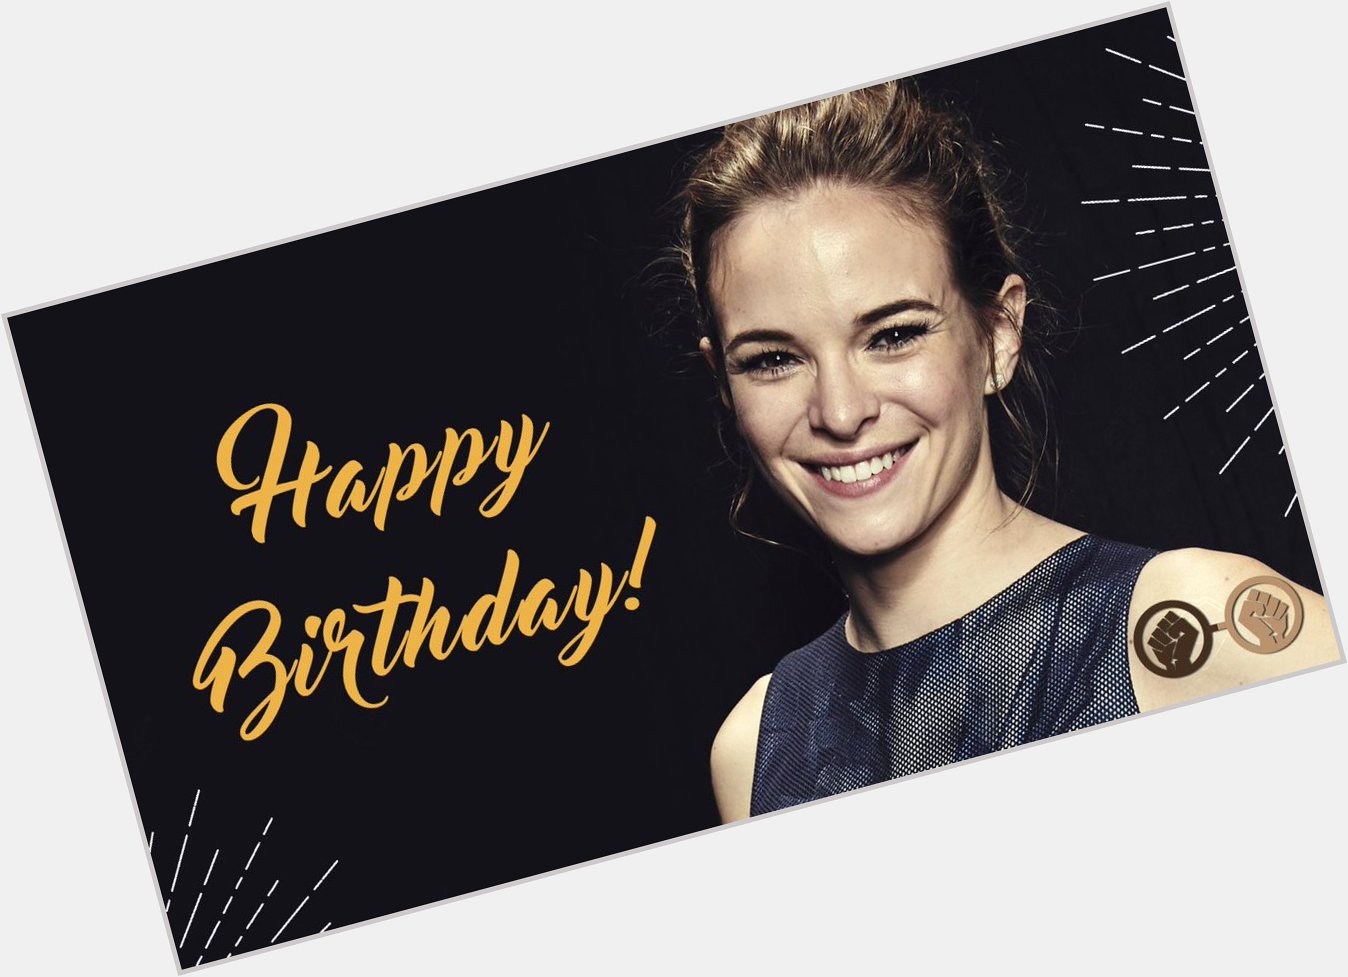 Happy birthday, Danielle Panabaker! The talented actress turns 31 today. We hope she\s having a good day! 